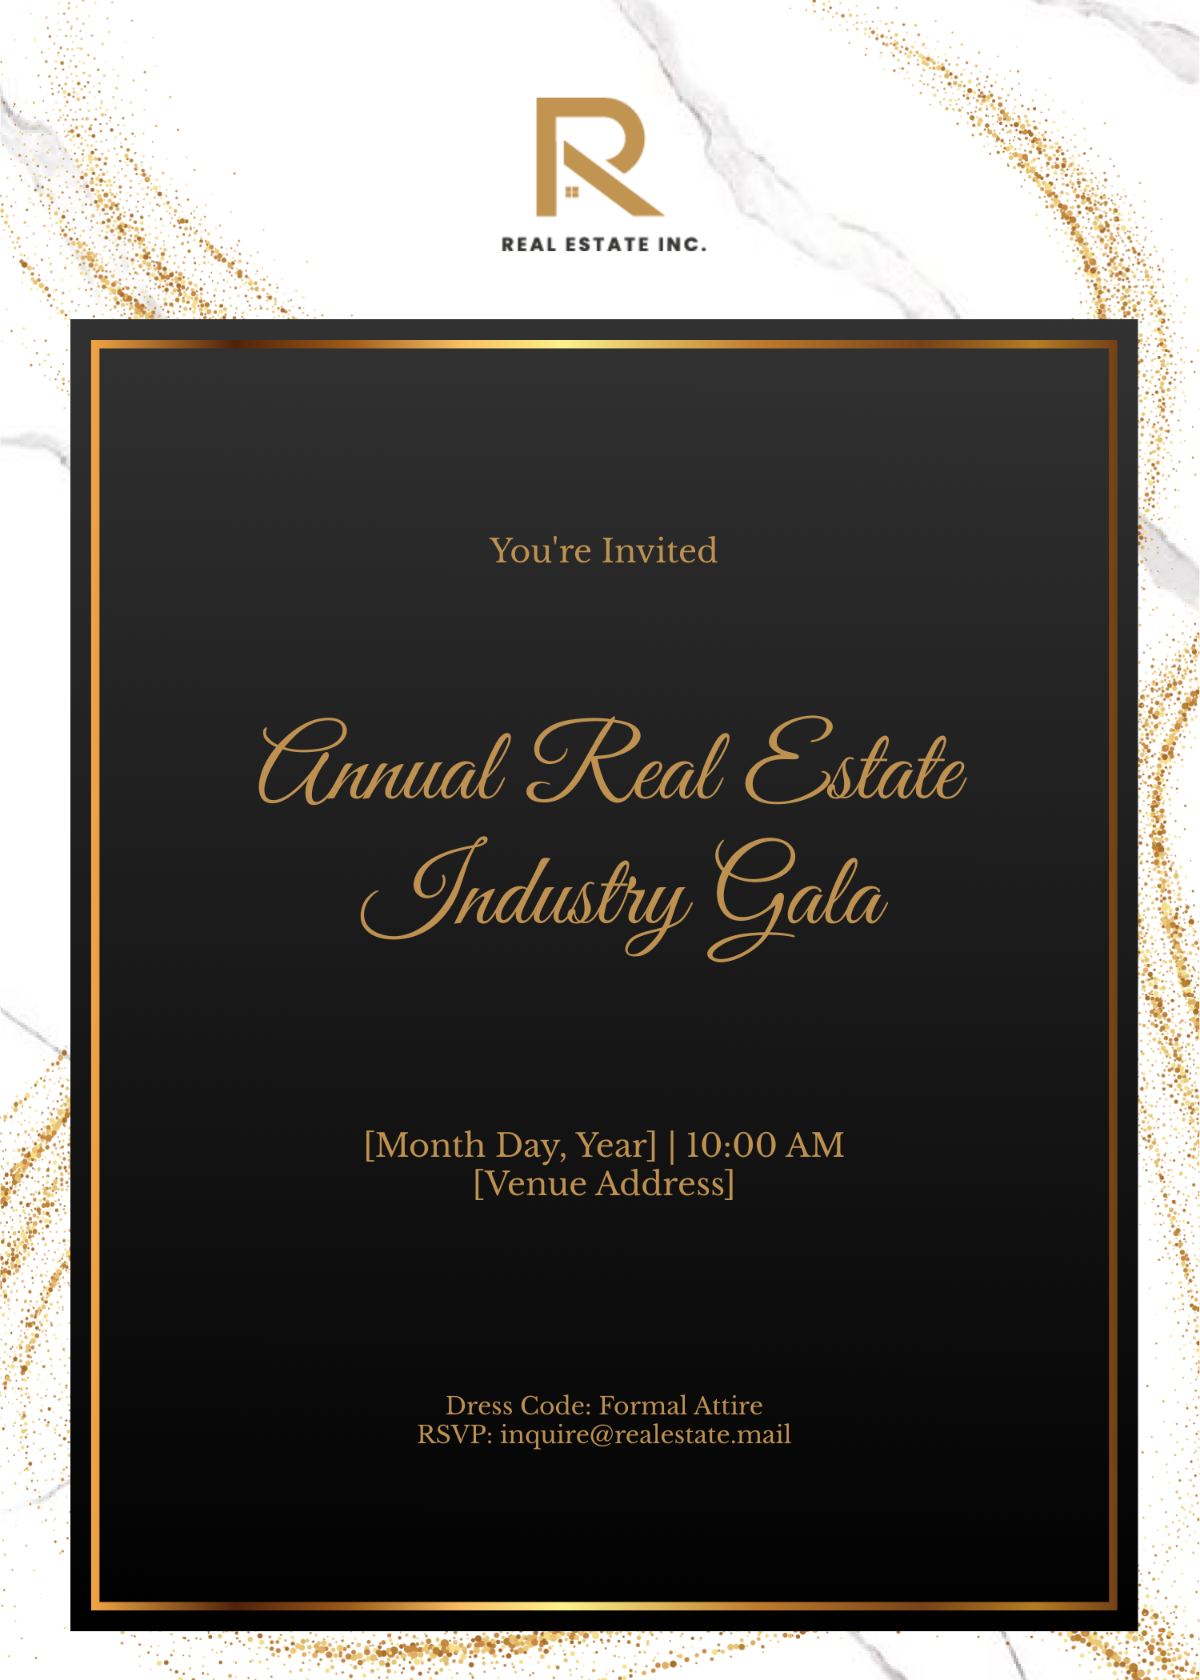 Free Annual Real Estate Industry Gala Invitation Card Template